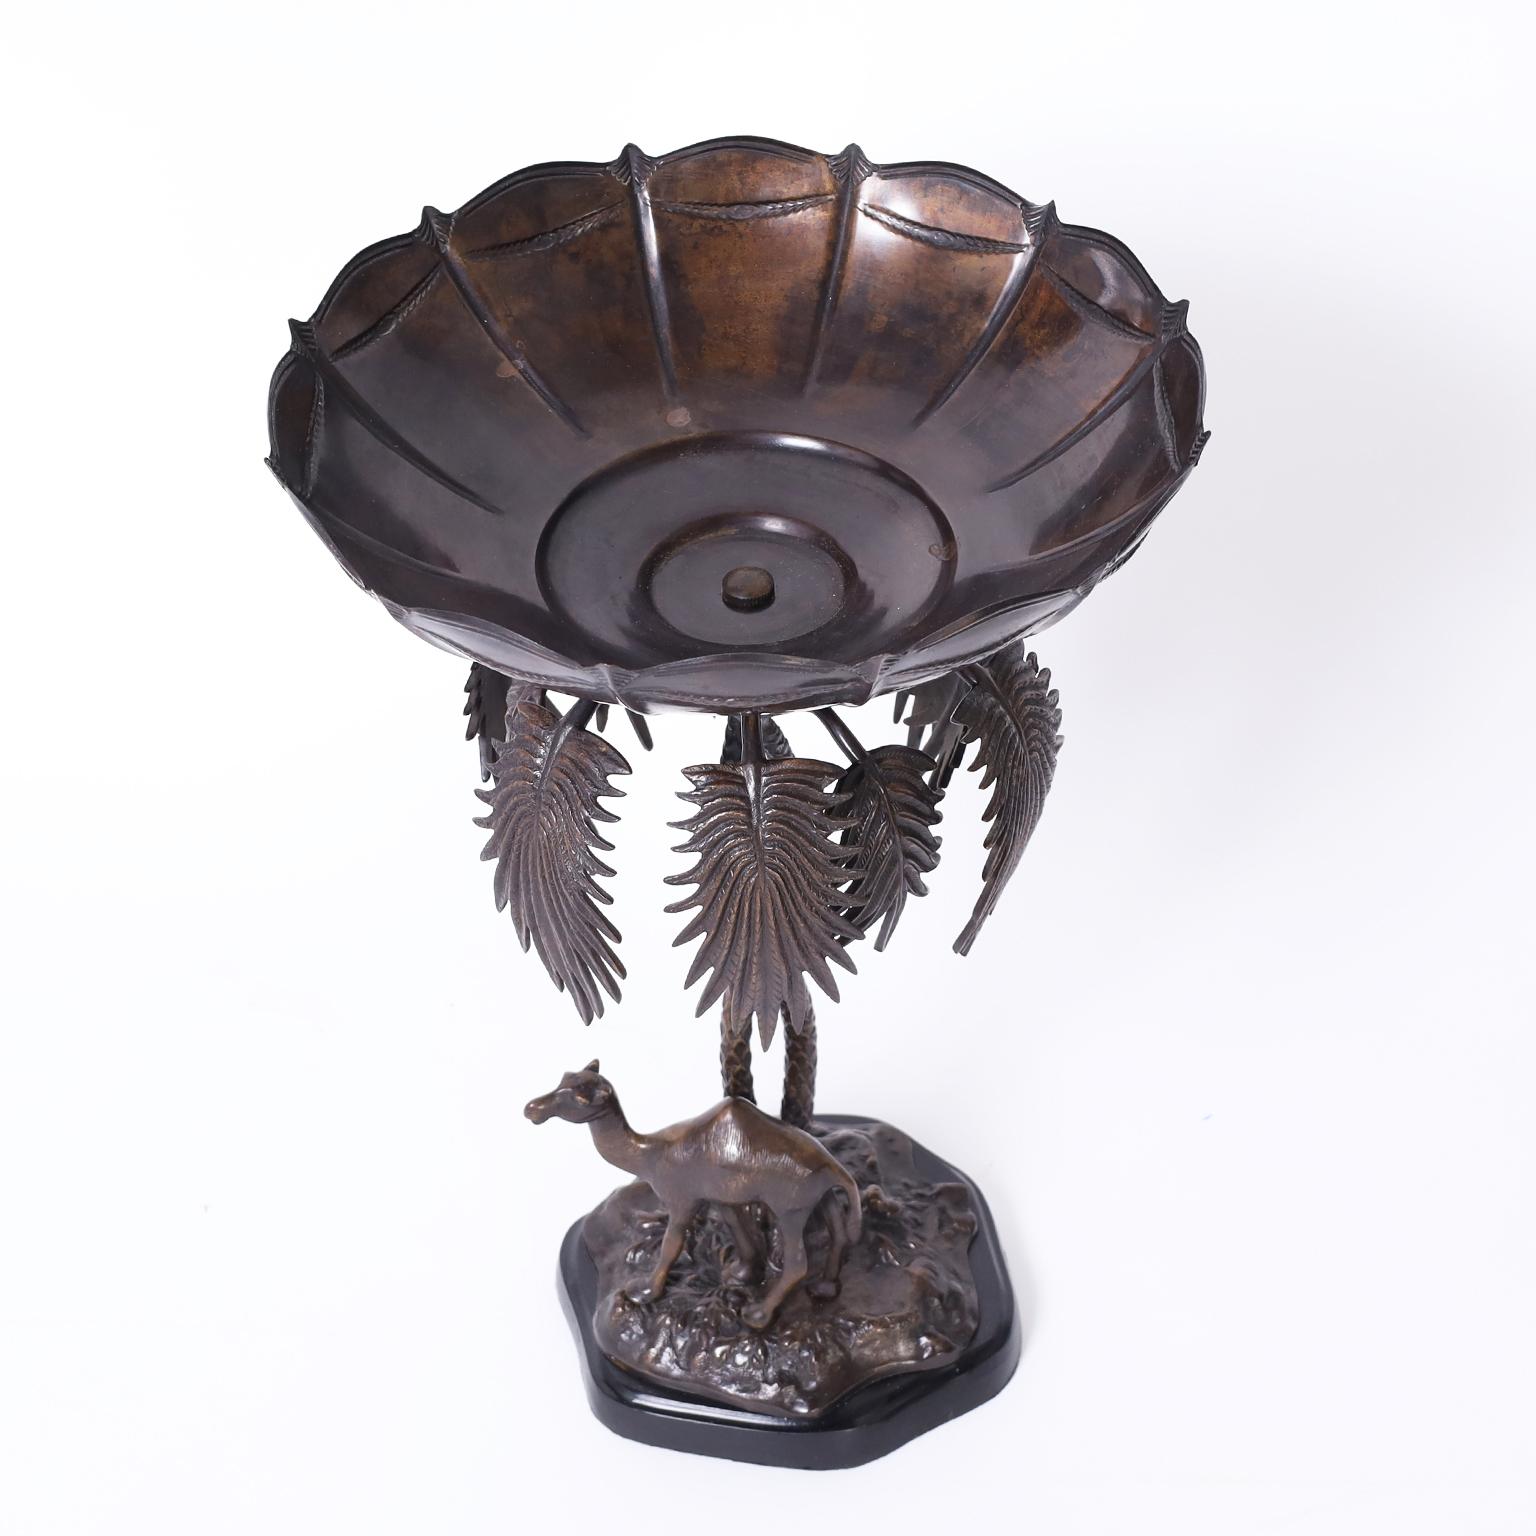 British colonial style cast bronze fruit or serving bowl on a palm tree stand over a camel on a faux terra firma base.